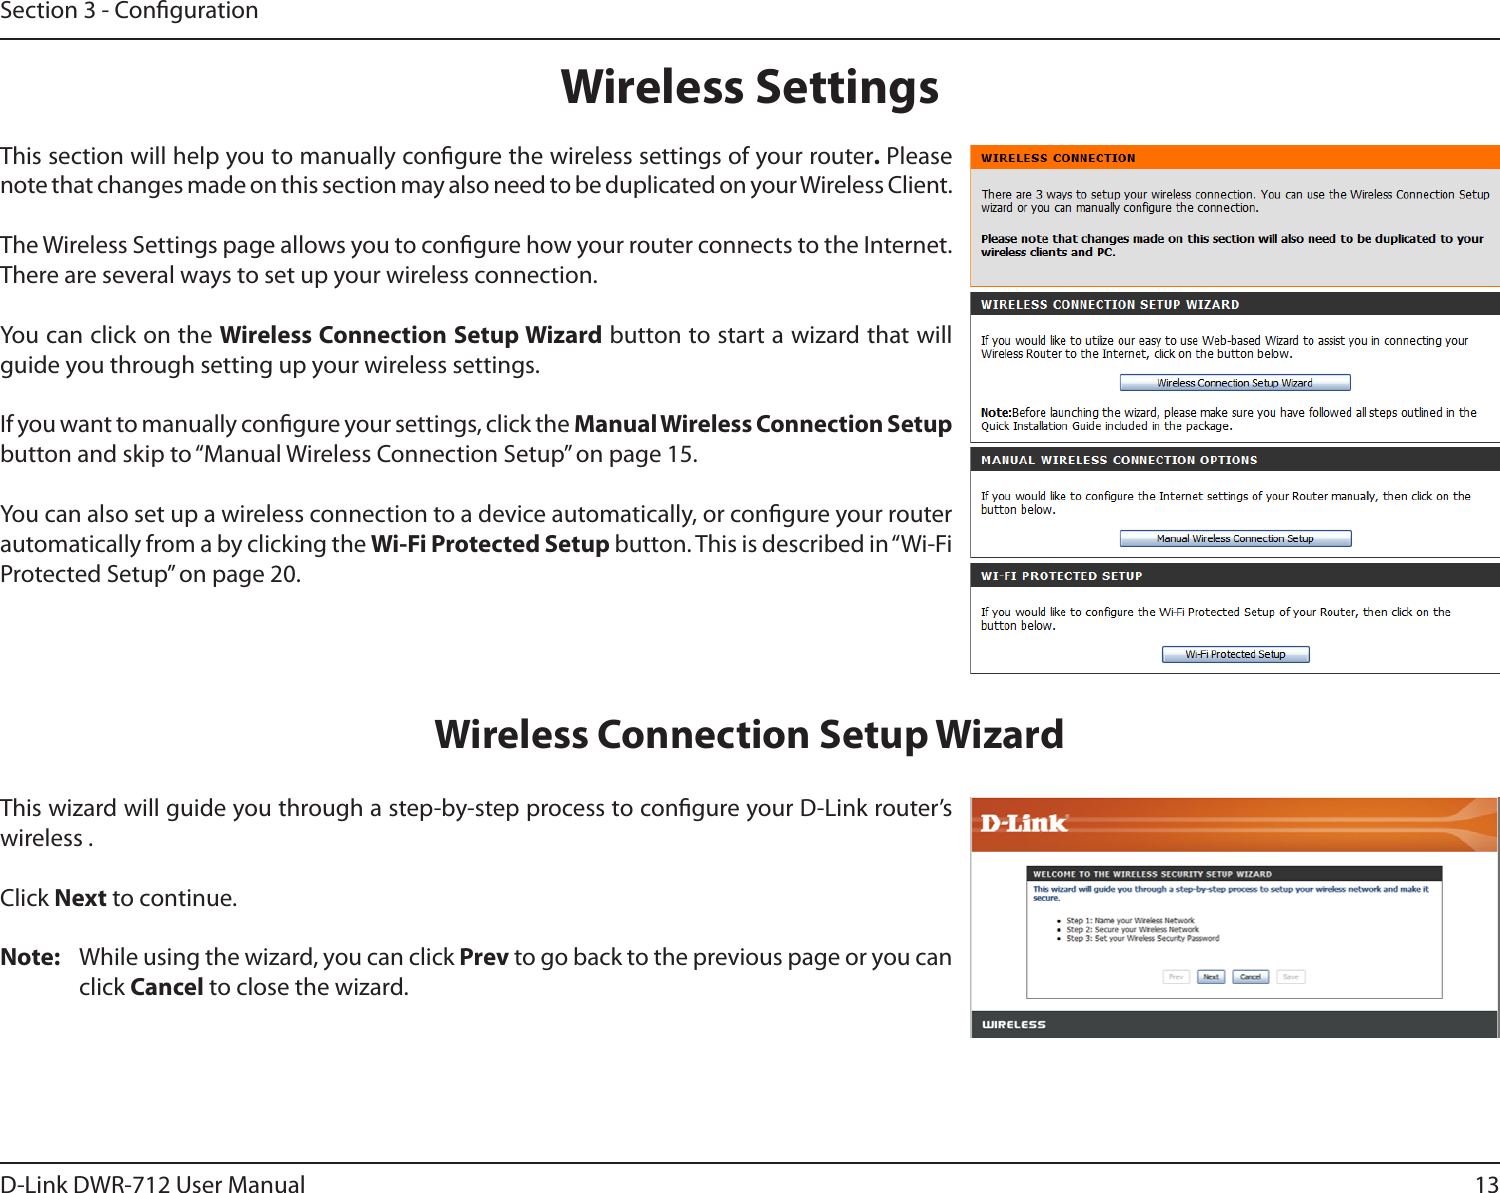 13D-Link DWR-712 User ManualSection 3 - CongurationWireless SettingsThis section will help you to manually congure the wireless settings of your router. Please note that changes made on this section may also need to be duplicated on your Wireless Client.The Wireless Settings page allows you to congure how your router connects to the Internet. There are several ways to set up your wireless connection. You can click on the Wireless Connection Setup Wizard button to start a wizard that will guide you through setting up your wireless settings.If you want to manually congure your settings, click the Manual Wireless Connection Setup button and skip to “Manual Wireless Connection Setup” on page 15.You can also set up a wireless connection to a device automatically, or congure your router automatically from a by clicking the Wi-Fi Protected Setup button. This is described in “Wi-Fi Protected Setup” on page 20.This wizard will guide you through a step-by-step process to congure your D-Link router’s wireless .Click Next to continue.Note:  While using the wizard, you can click Prev to go back to the previous page or you can click Cancel to close the wizard.Wireless Connection Setup Wizard